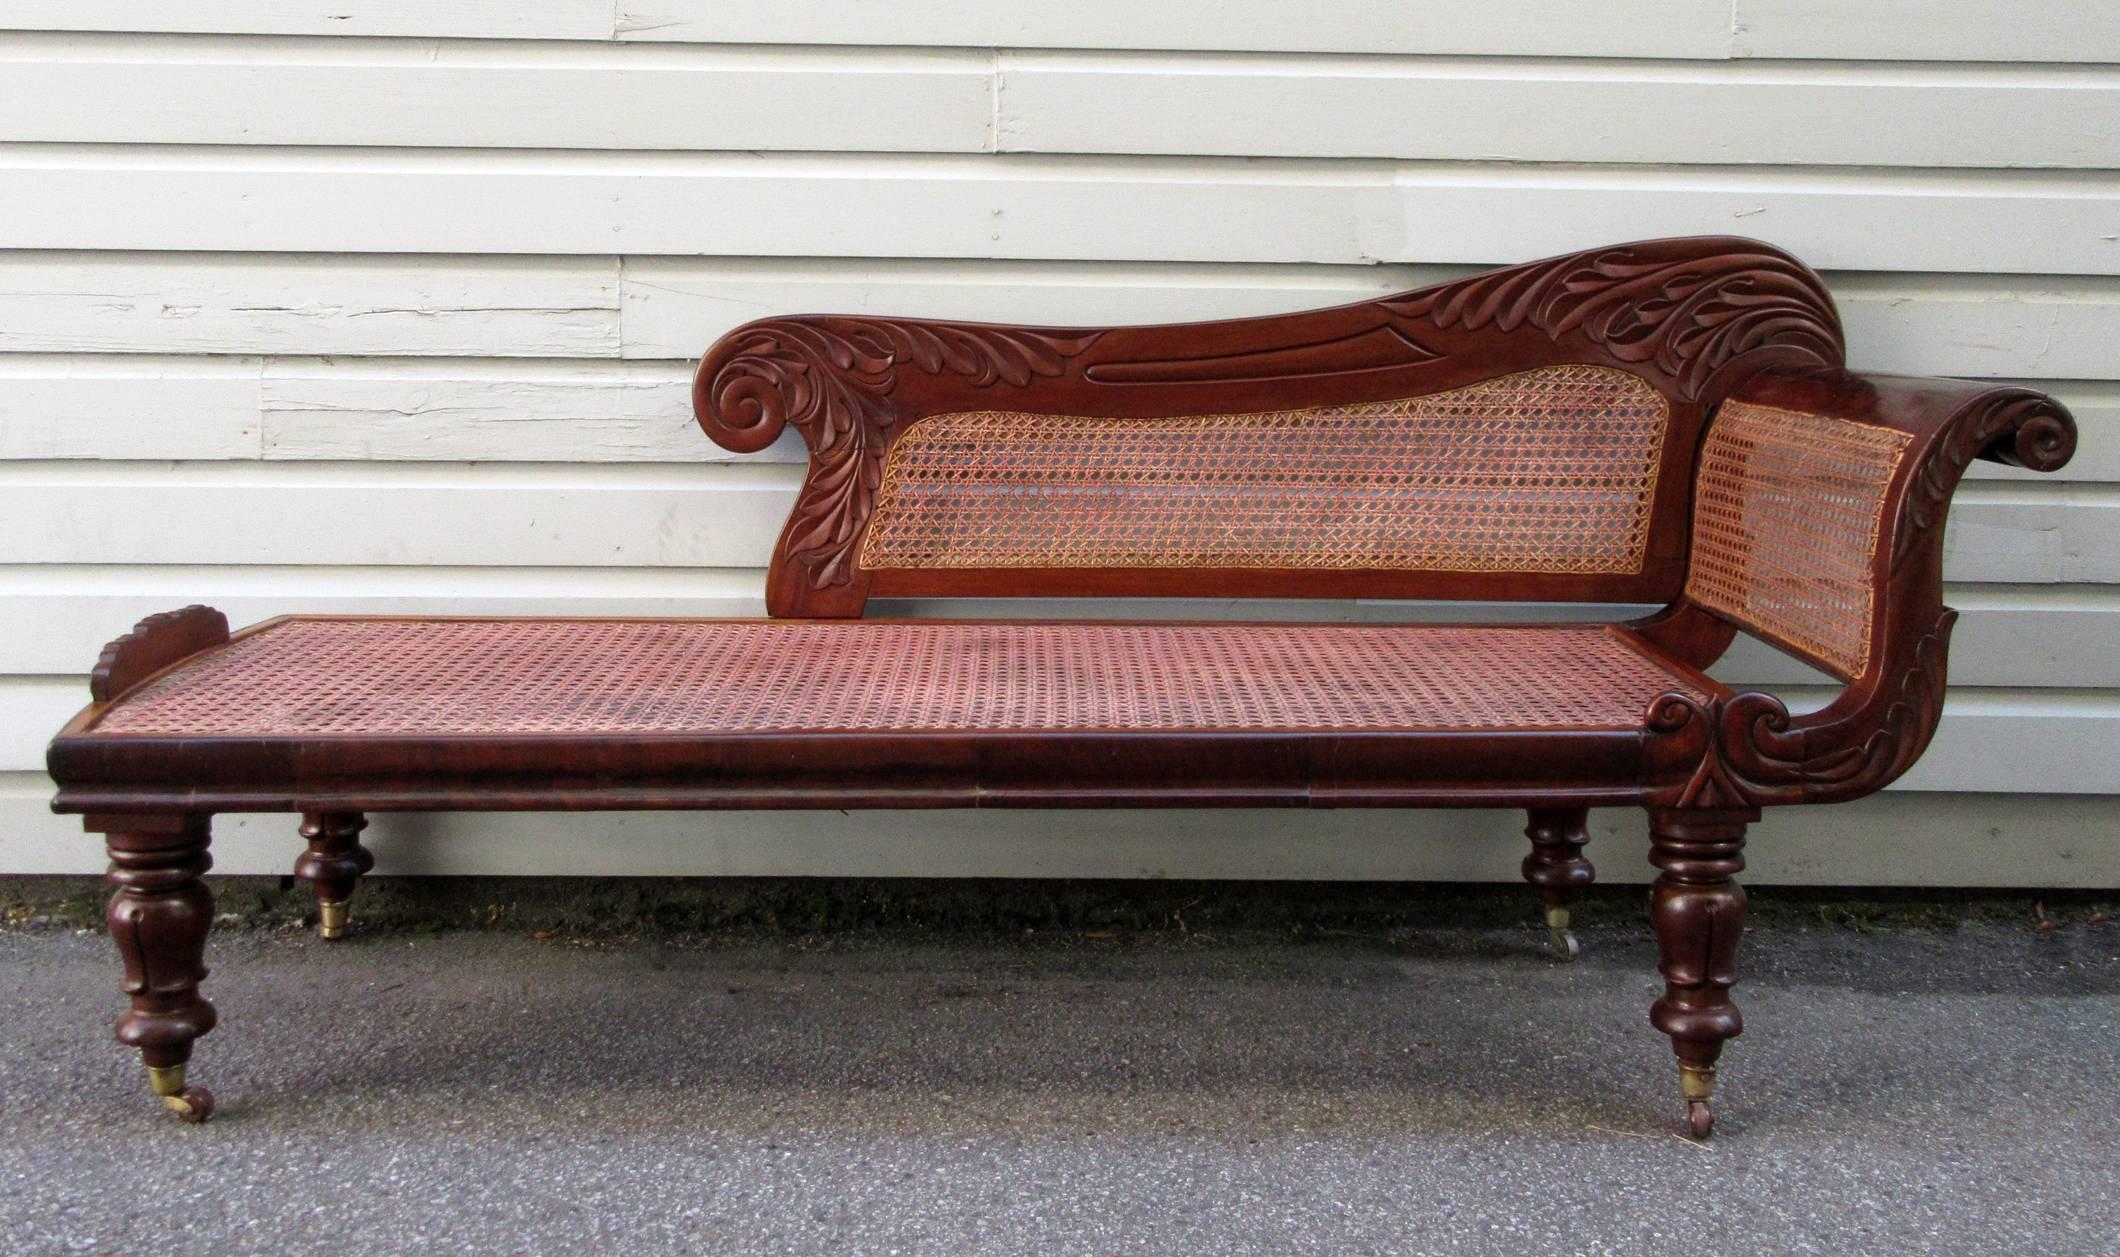 A 19th century Caribbean Regency mahogany recamier from Barbados, circa 1830, with handwoven caning, stylized acanthus and wave carvings and turned inverted tulip legs ending with original cup casters.